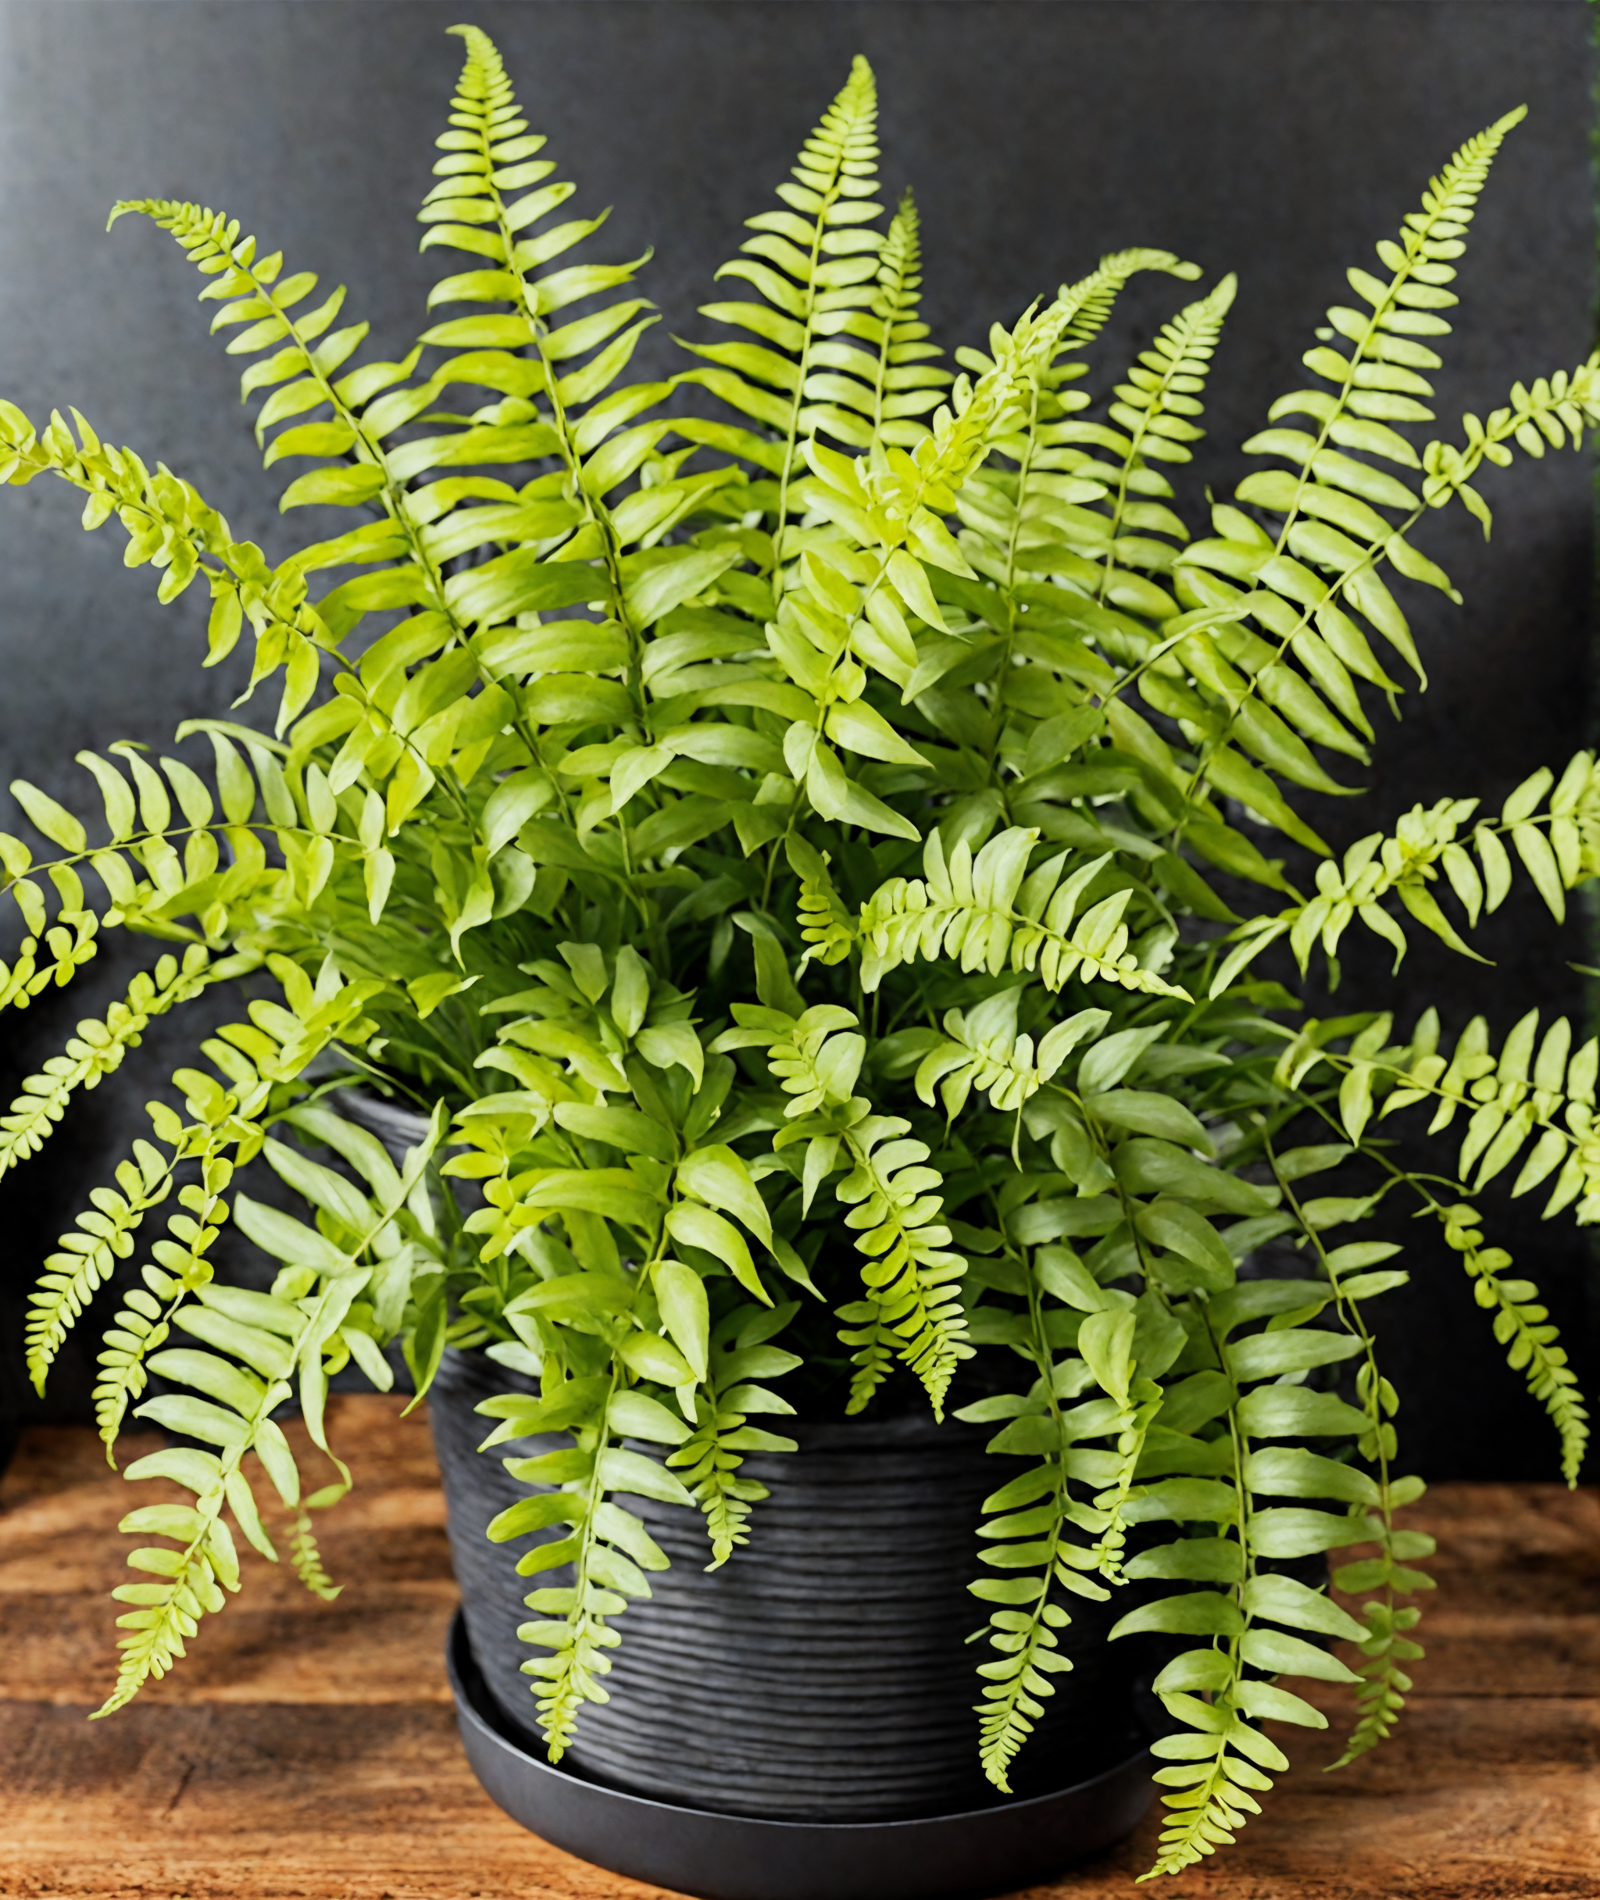 Nephrolepis exaltata (Boston fern) in a black bowl on a wooden surface, with clear, well-lit neutral backdrop.